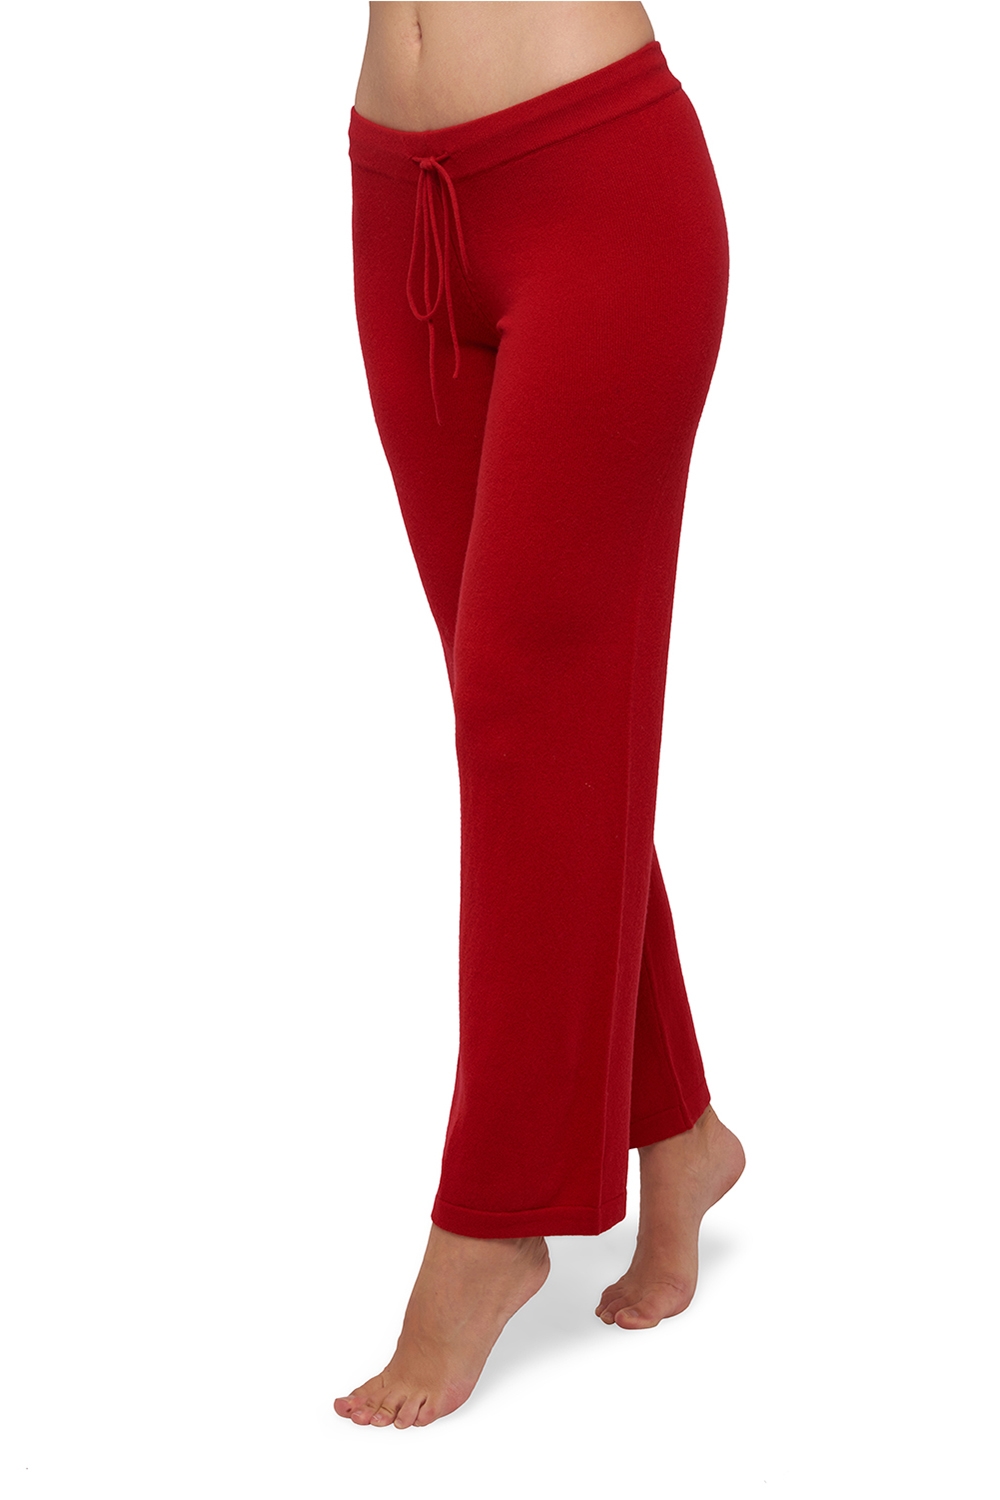 Cashmere ladies trousers leggings malice blood red xs